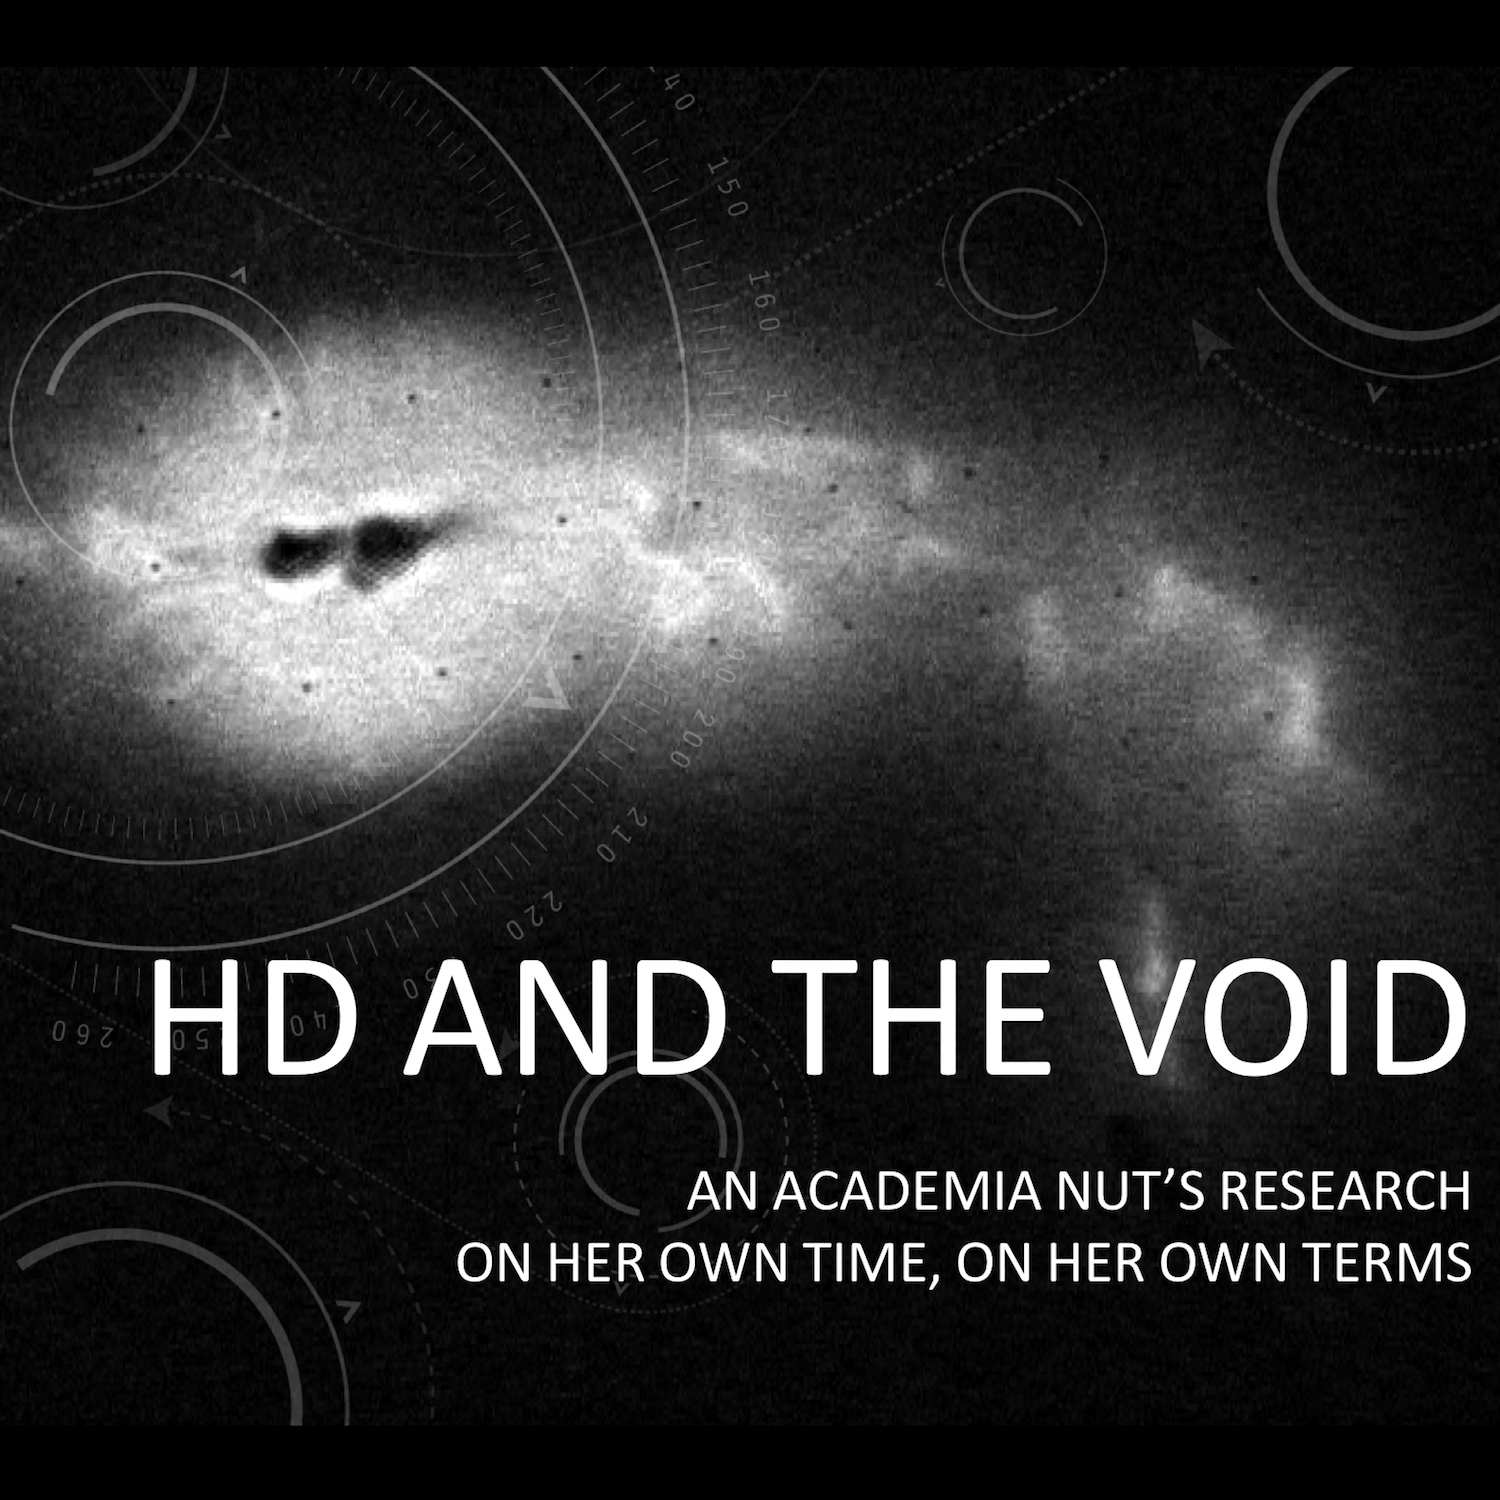 HD and the Void